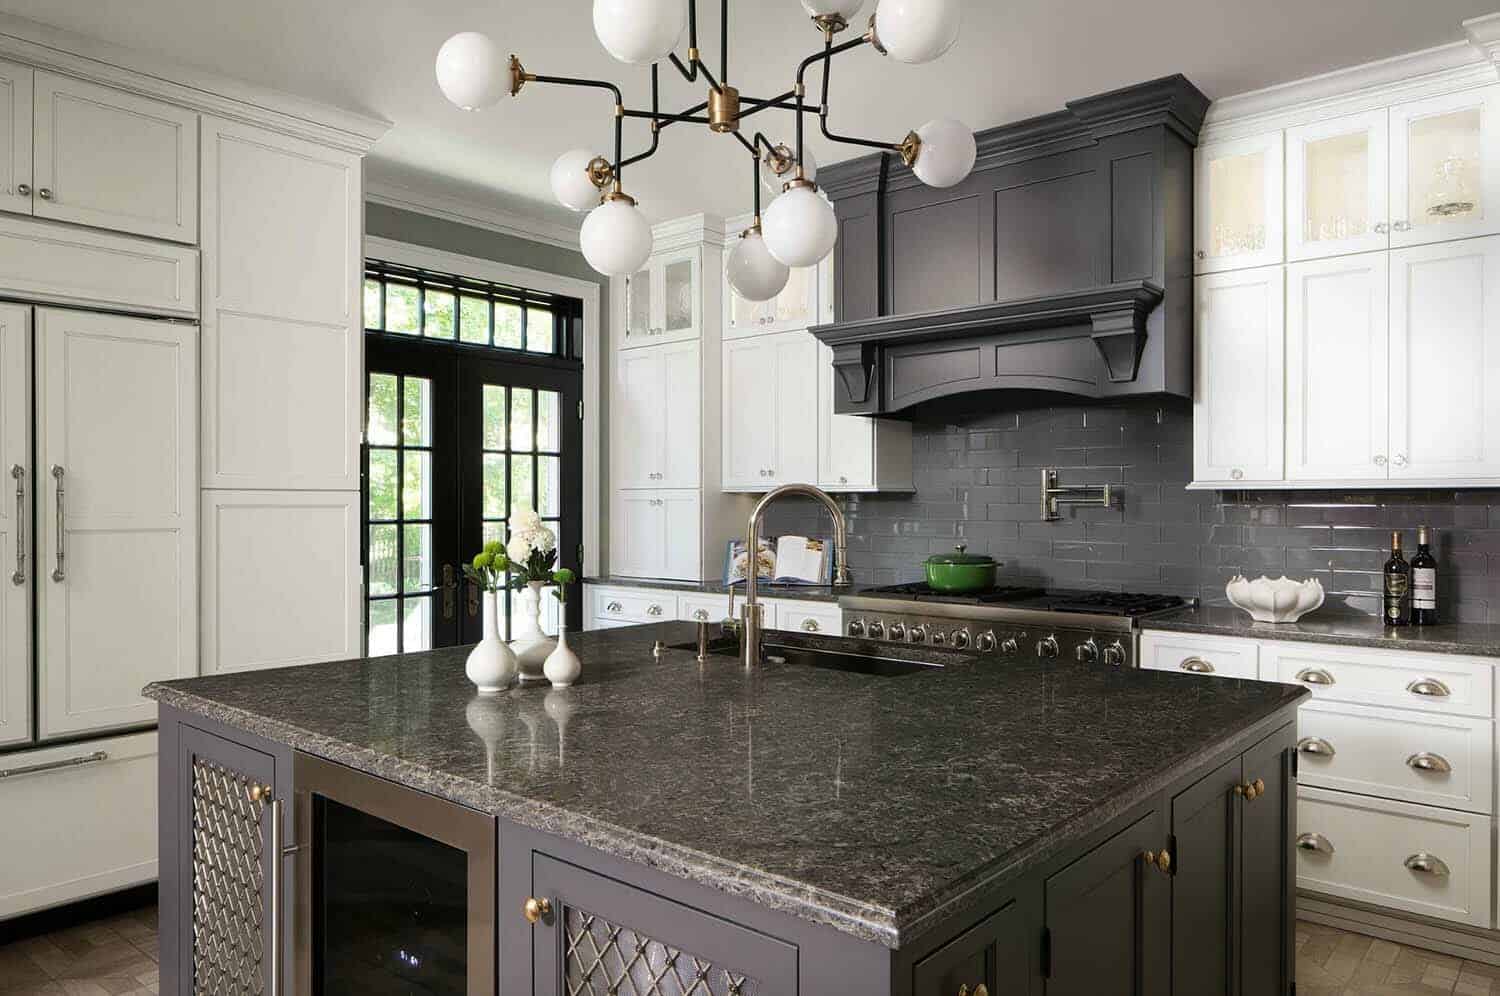 30 Stylish And Elegant Kitchens With Light And Dark Contrasts